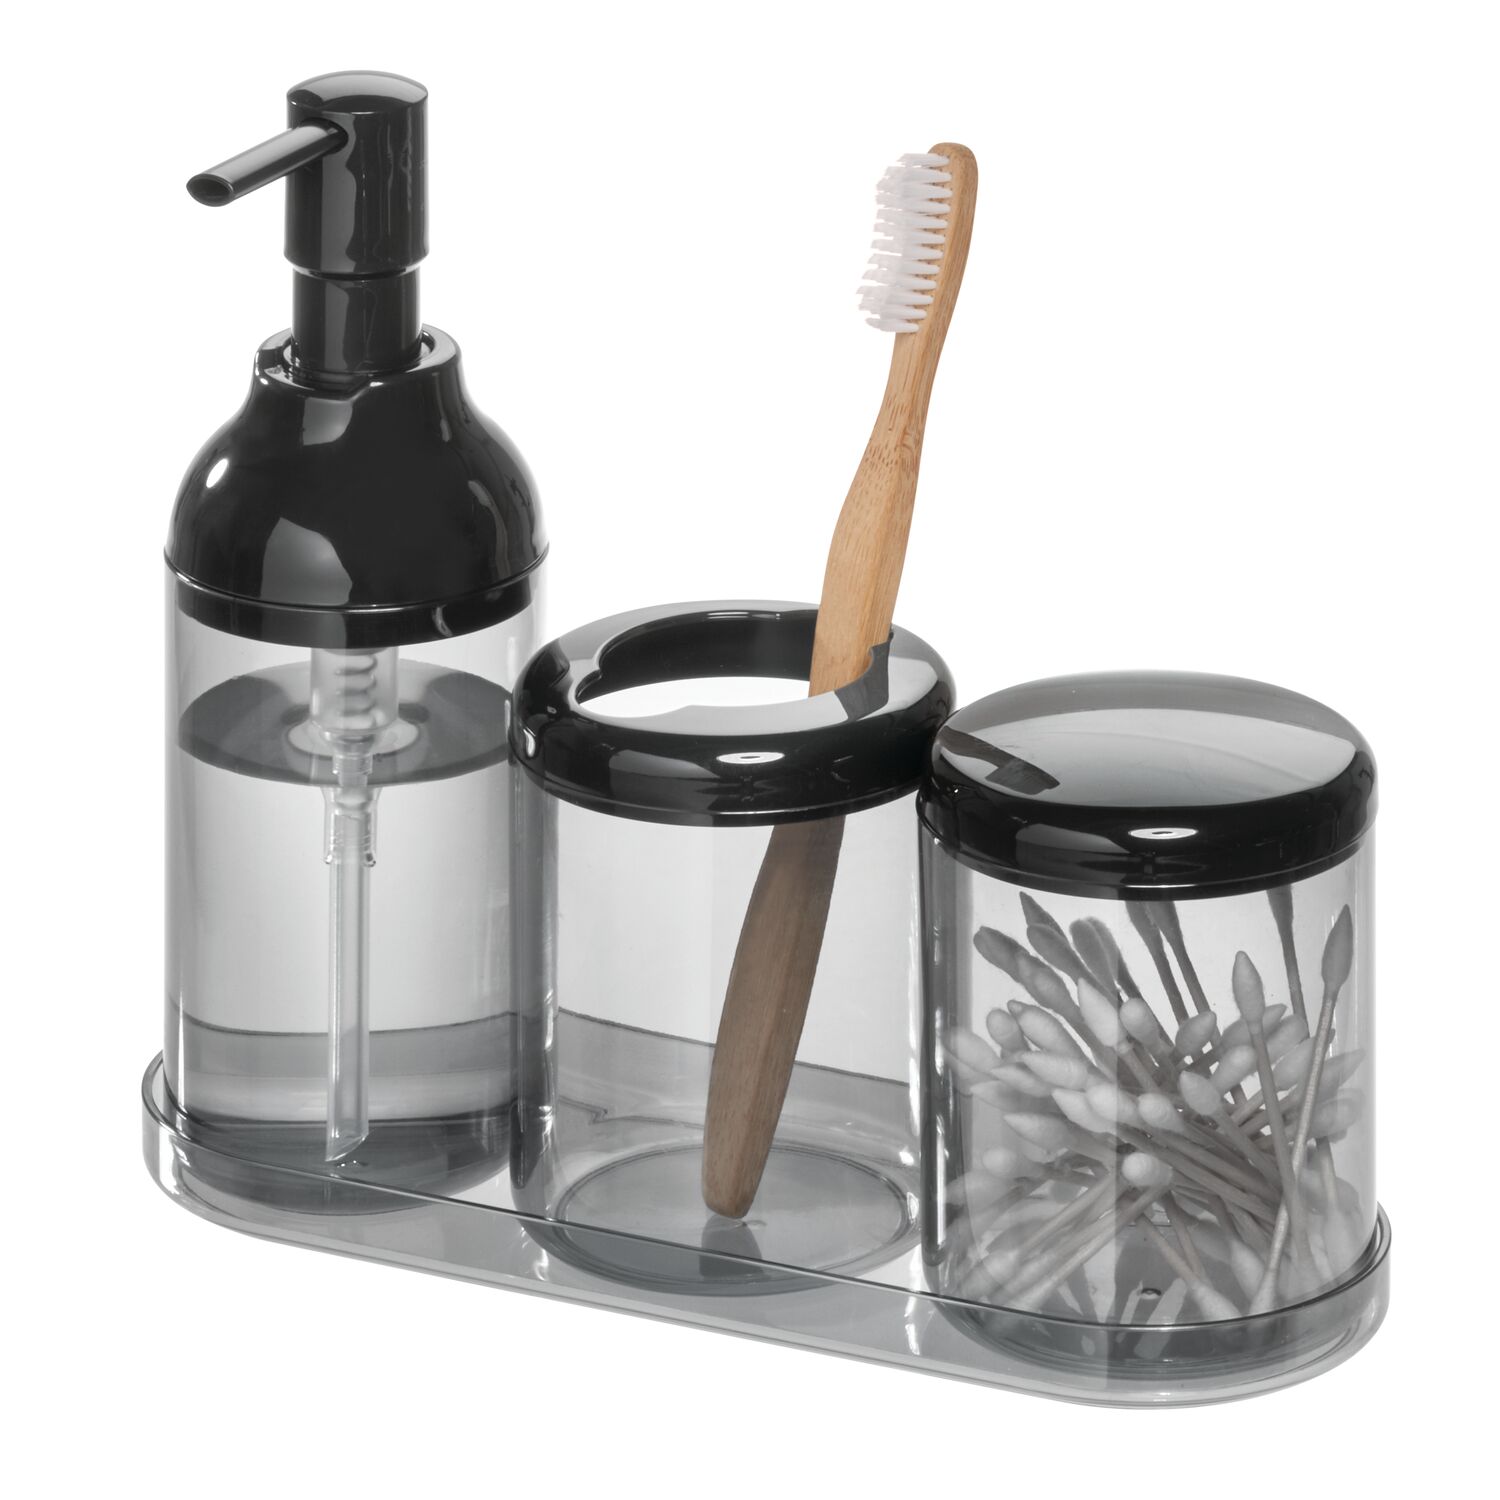 iDesign 4 Piece Clear Bath Accessories Sets, Black - image 1 of 6